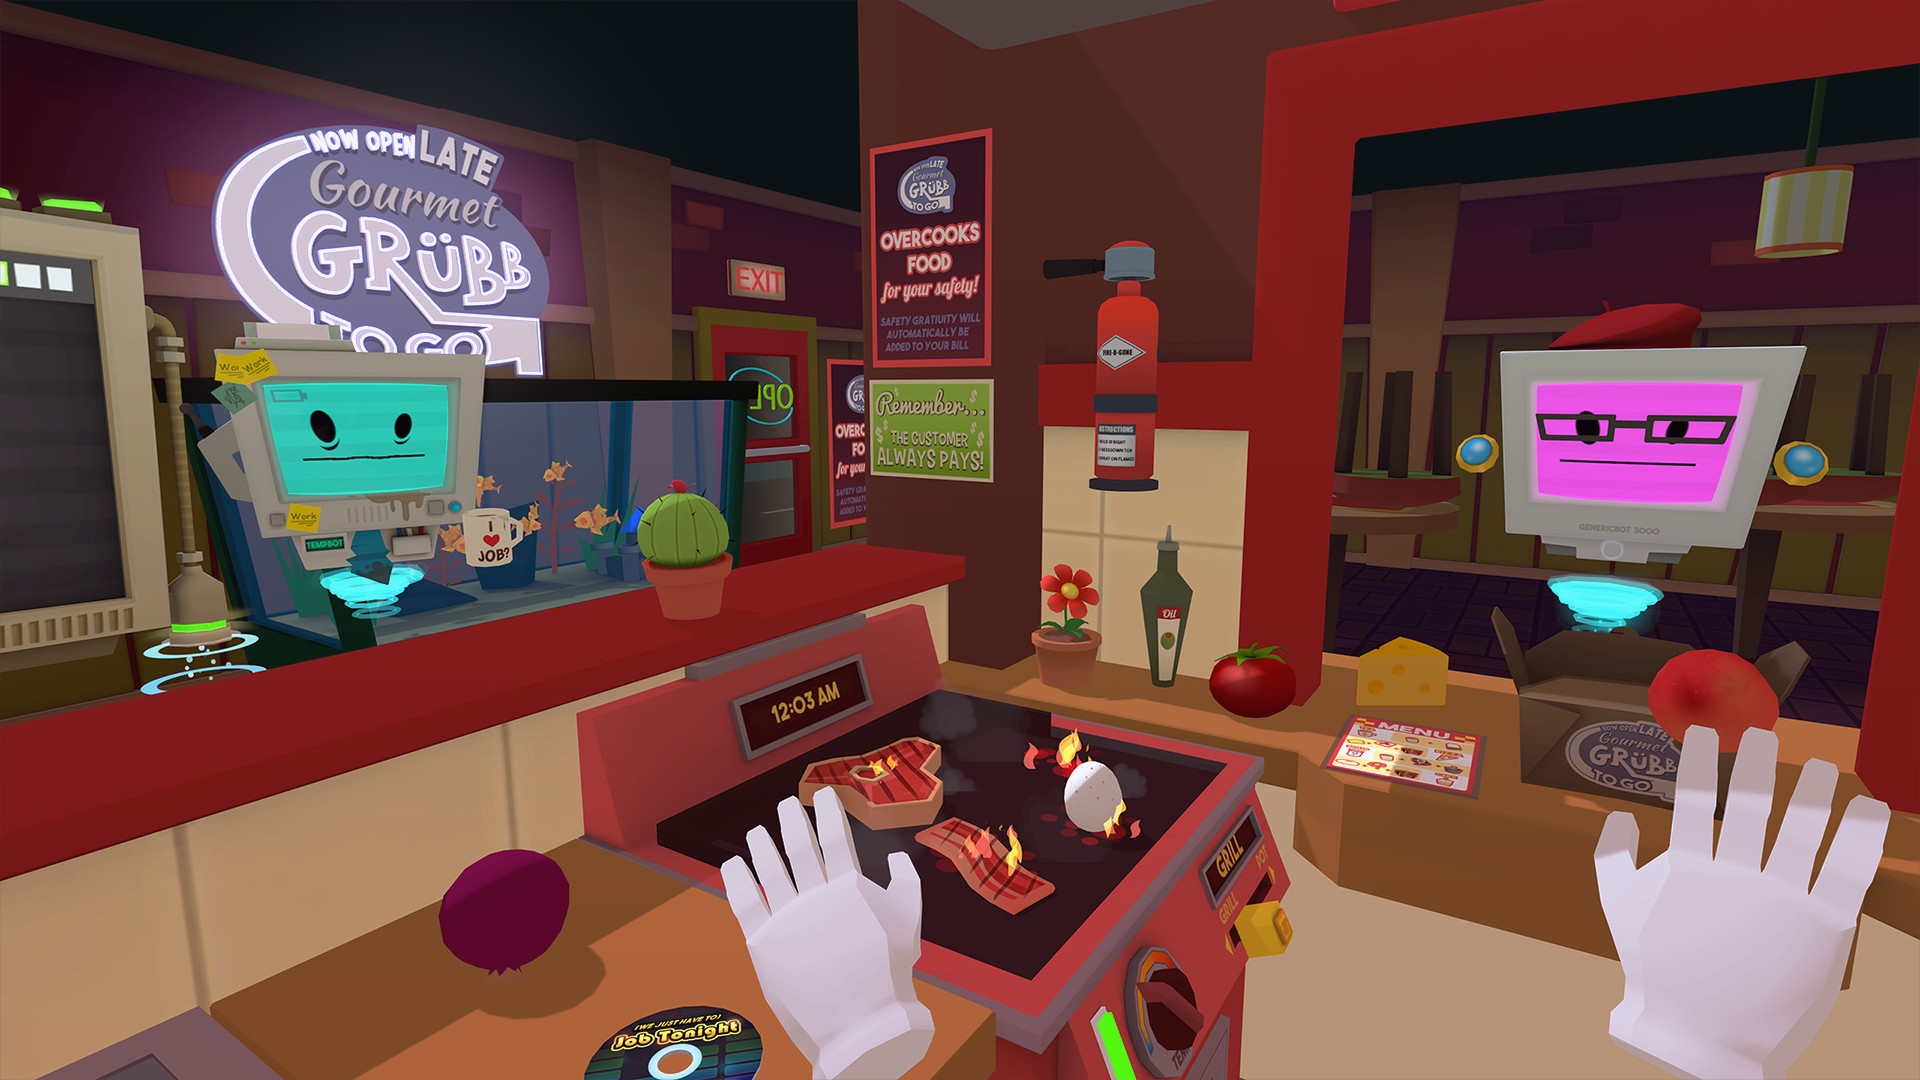 Job Simulator: The 2050 Archives offers humans 'work' in a robot world